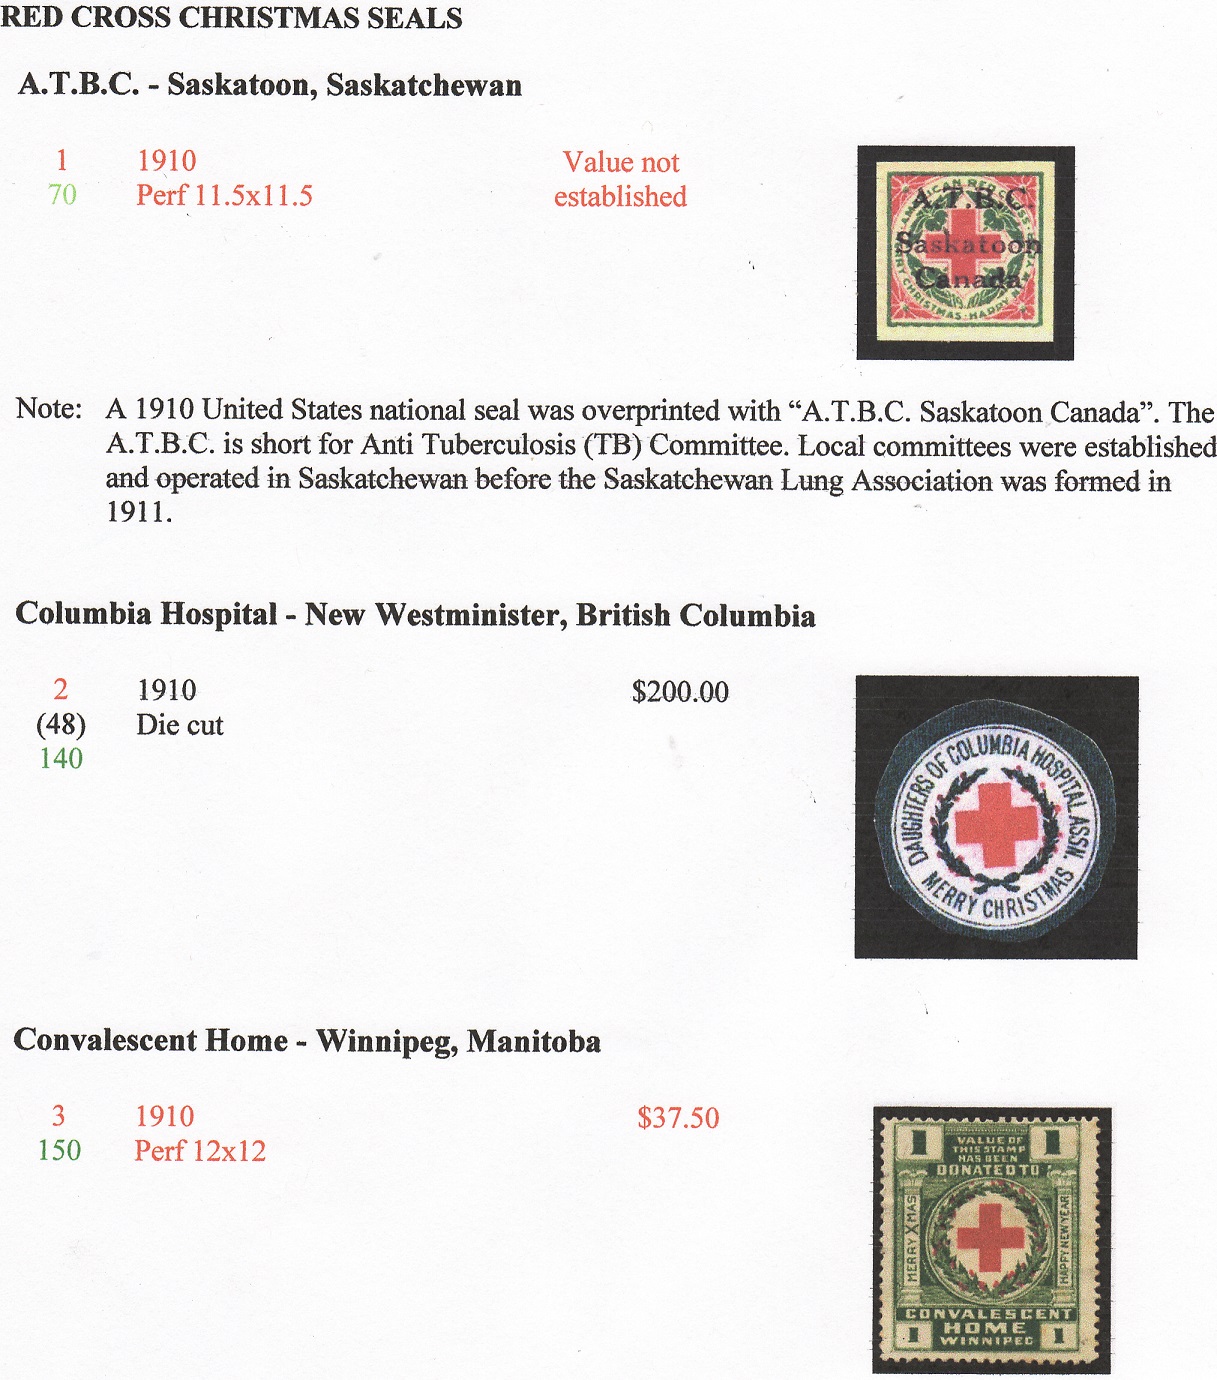 Mosbaugh's Catalog, Canadian Red Cross Seals, 2011 ed. CD, page 5